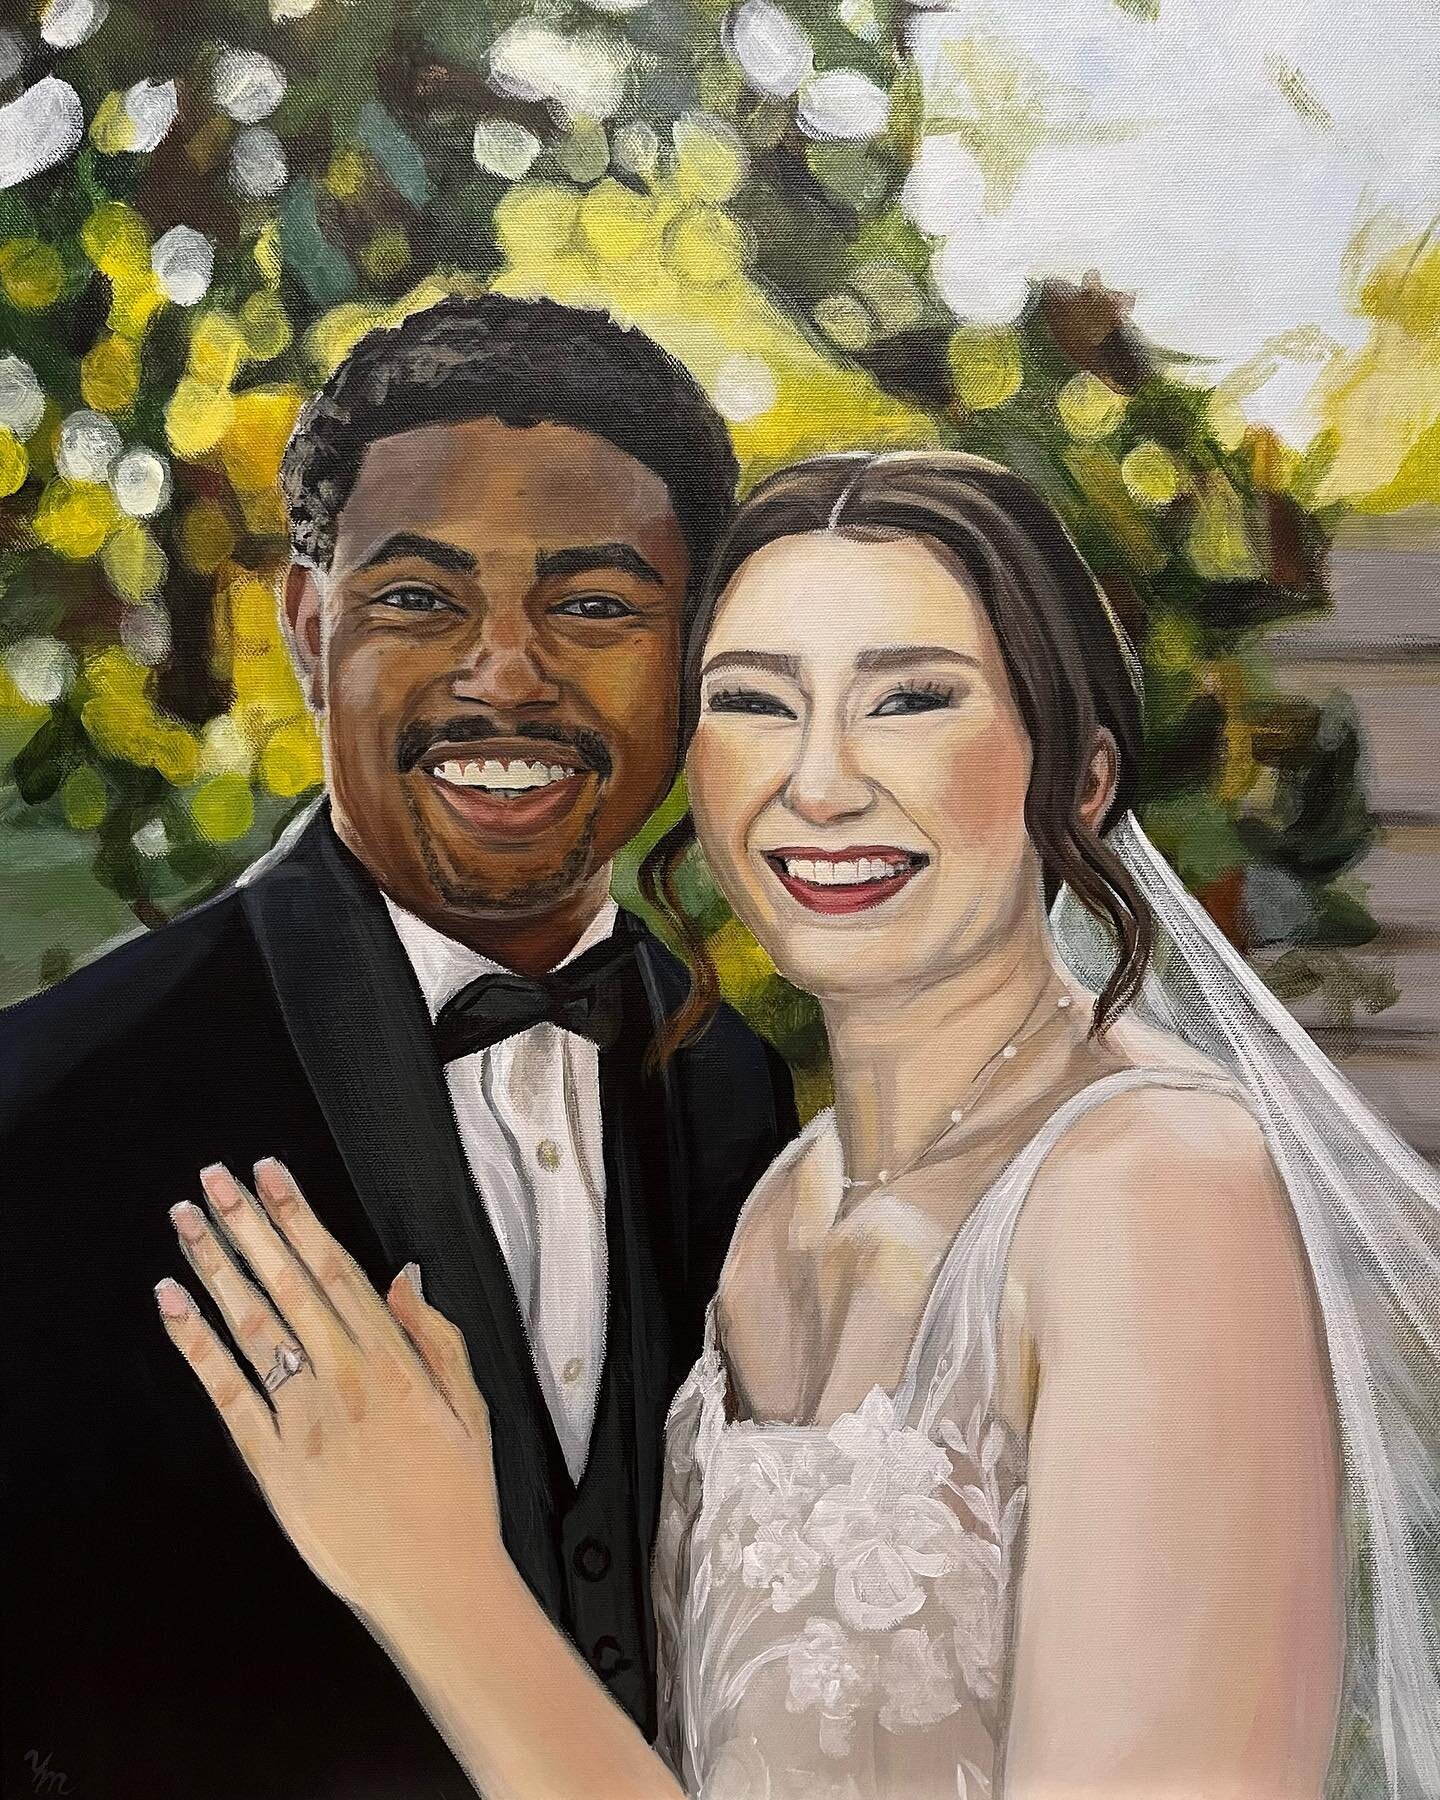 My first ever up close wedding portrait and I have to say&hellip;I&rsquo;m OBSESSED with how it turned out! I enjoyed the process and getting to paint for this beautiful couple. 

#sanantonioweddingpainter #texasweddingpainter #weddingpainting #weddi